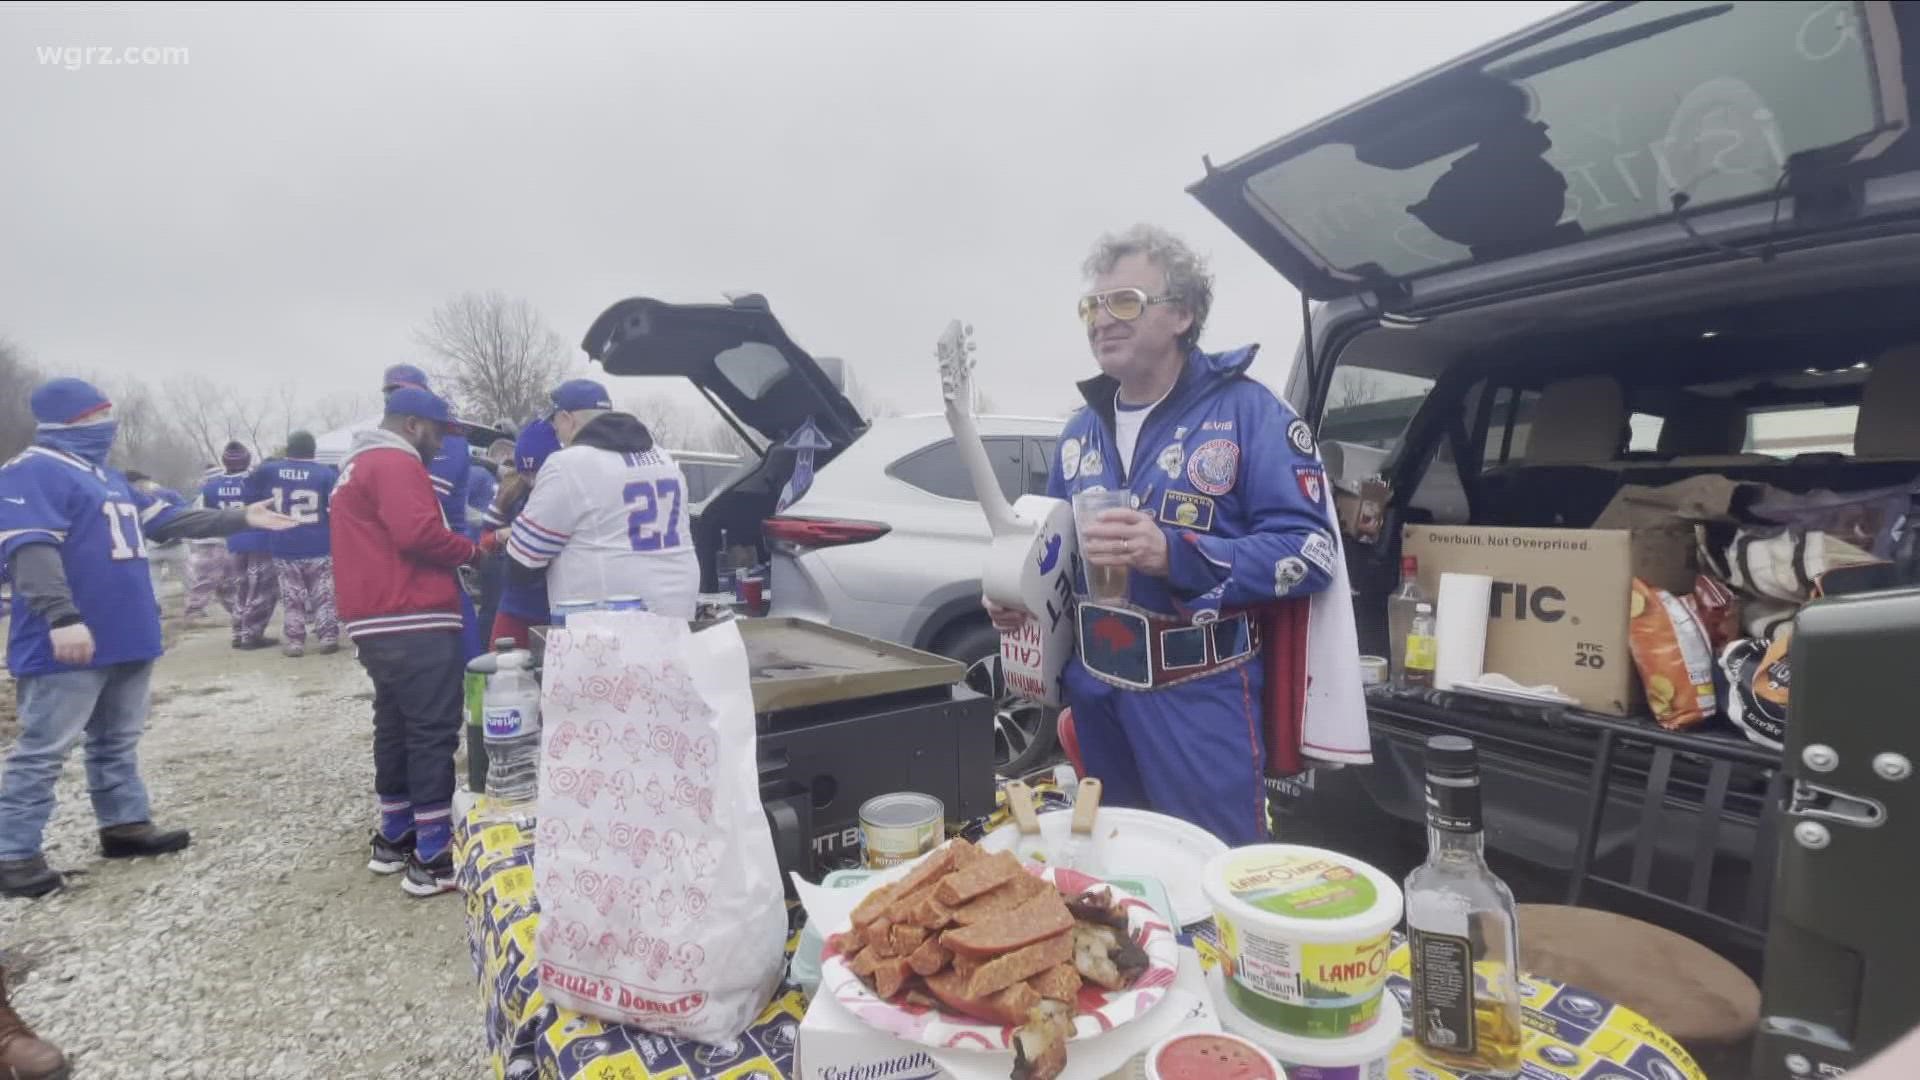 Bills fans are in disbelief  after someone stole thousands of dollars worth of tailgating equipment during Sunday's game.